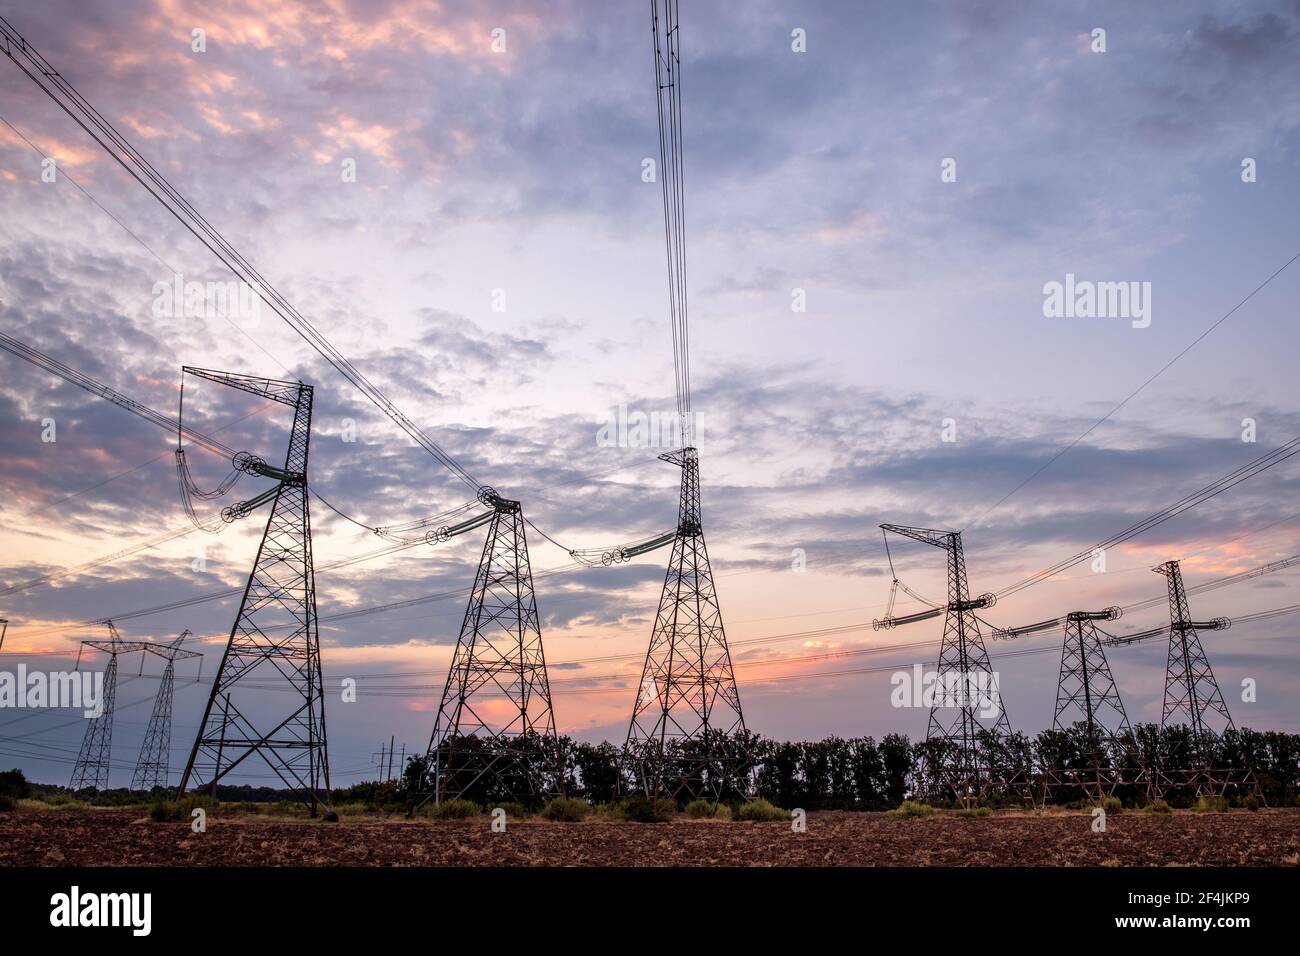 Electrical pylons and high voltage power lines at sunset background. Group silhouette of transmission towers. Stock Photo